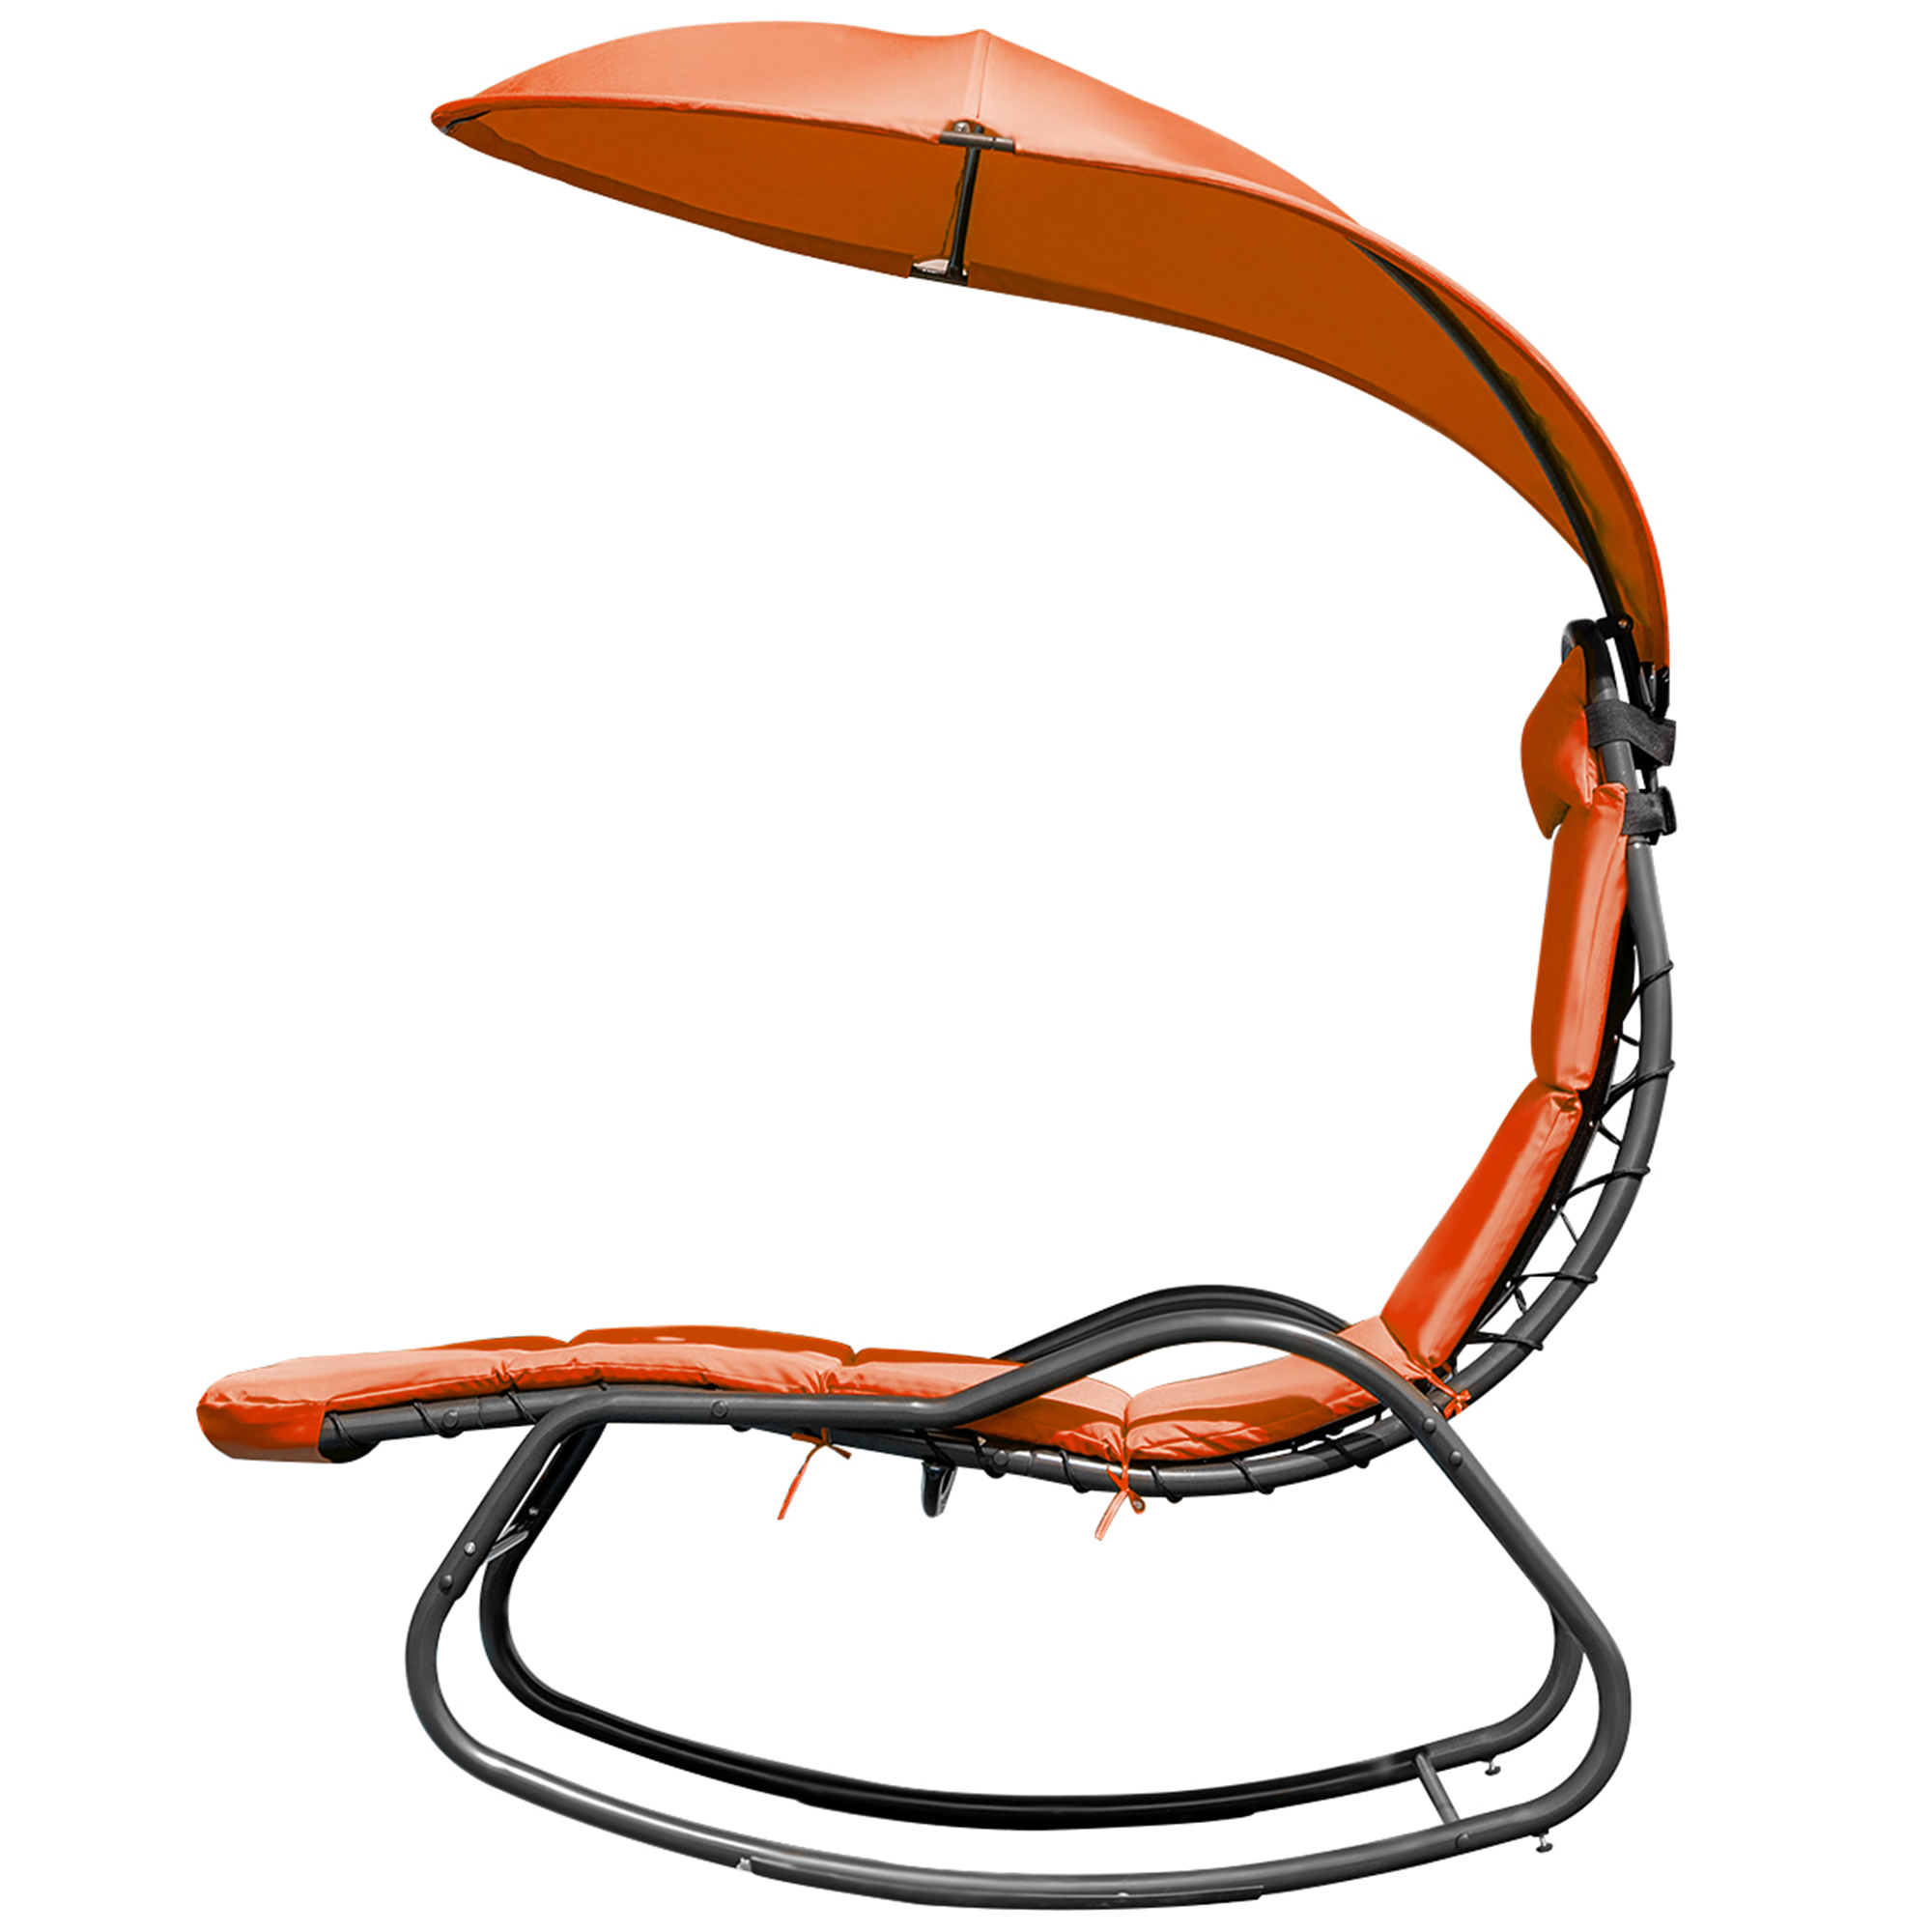 Gymax Patio Lounge Chair Chaise Garden w/ Steel Frame Cushion Canopy Orange - image 3 of 10